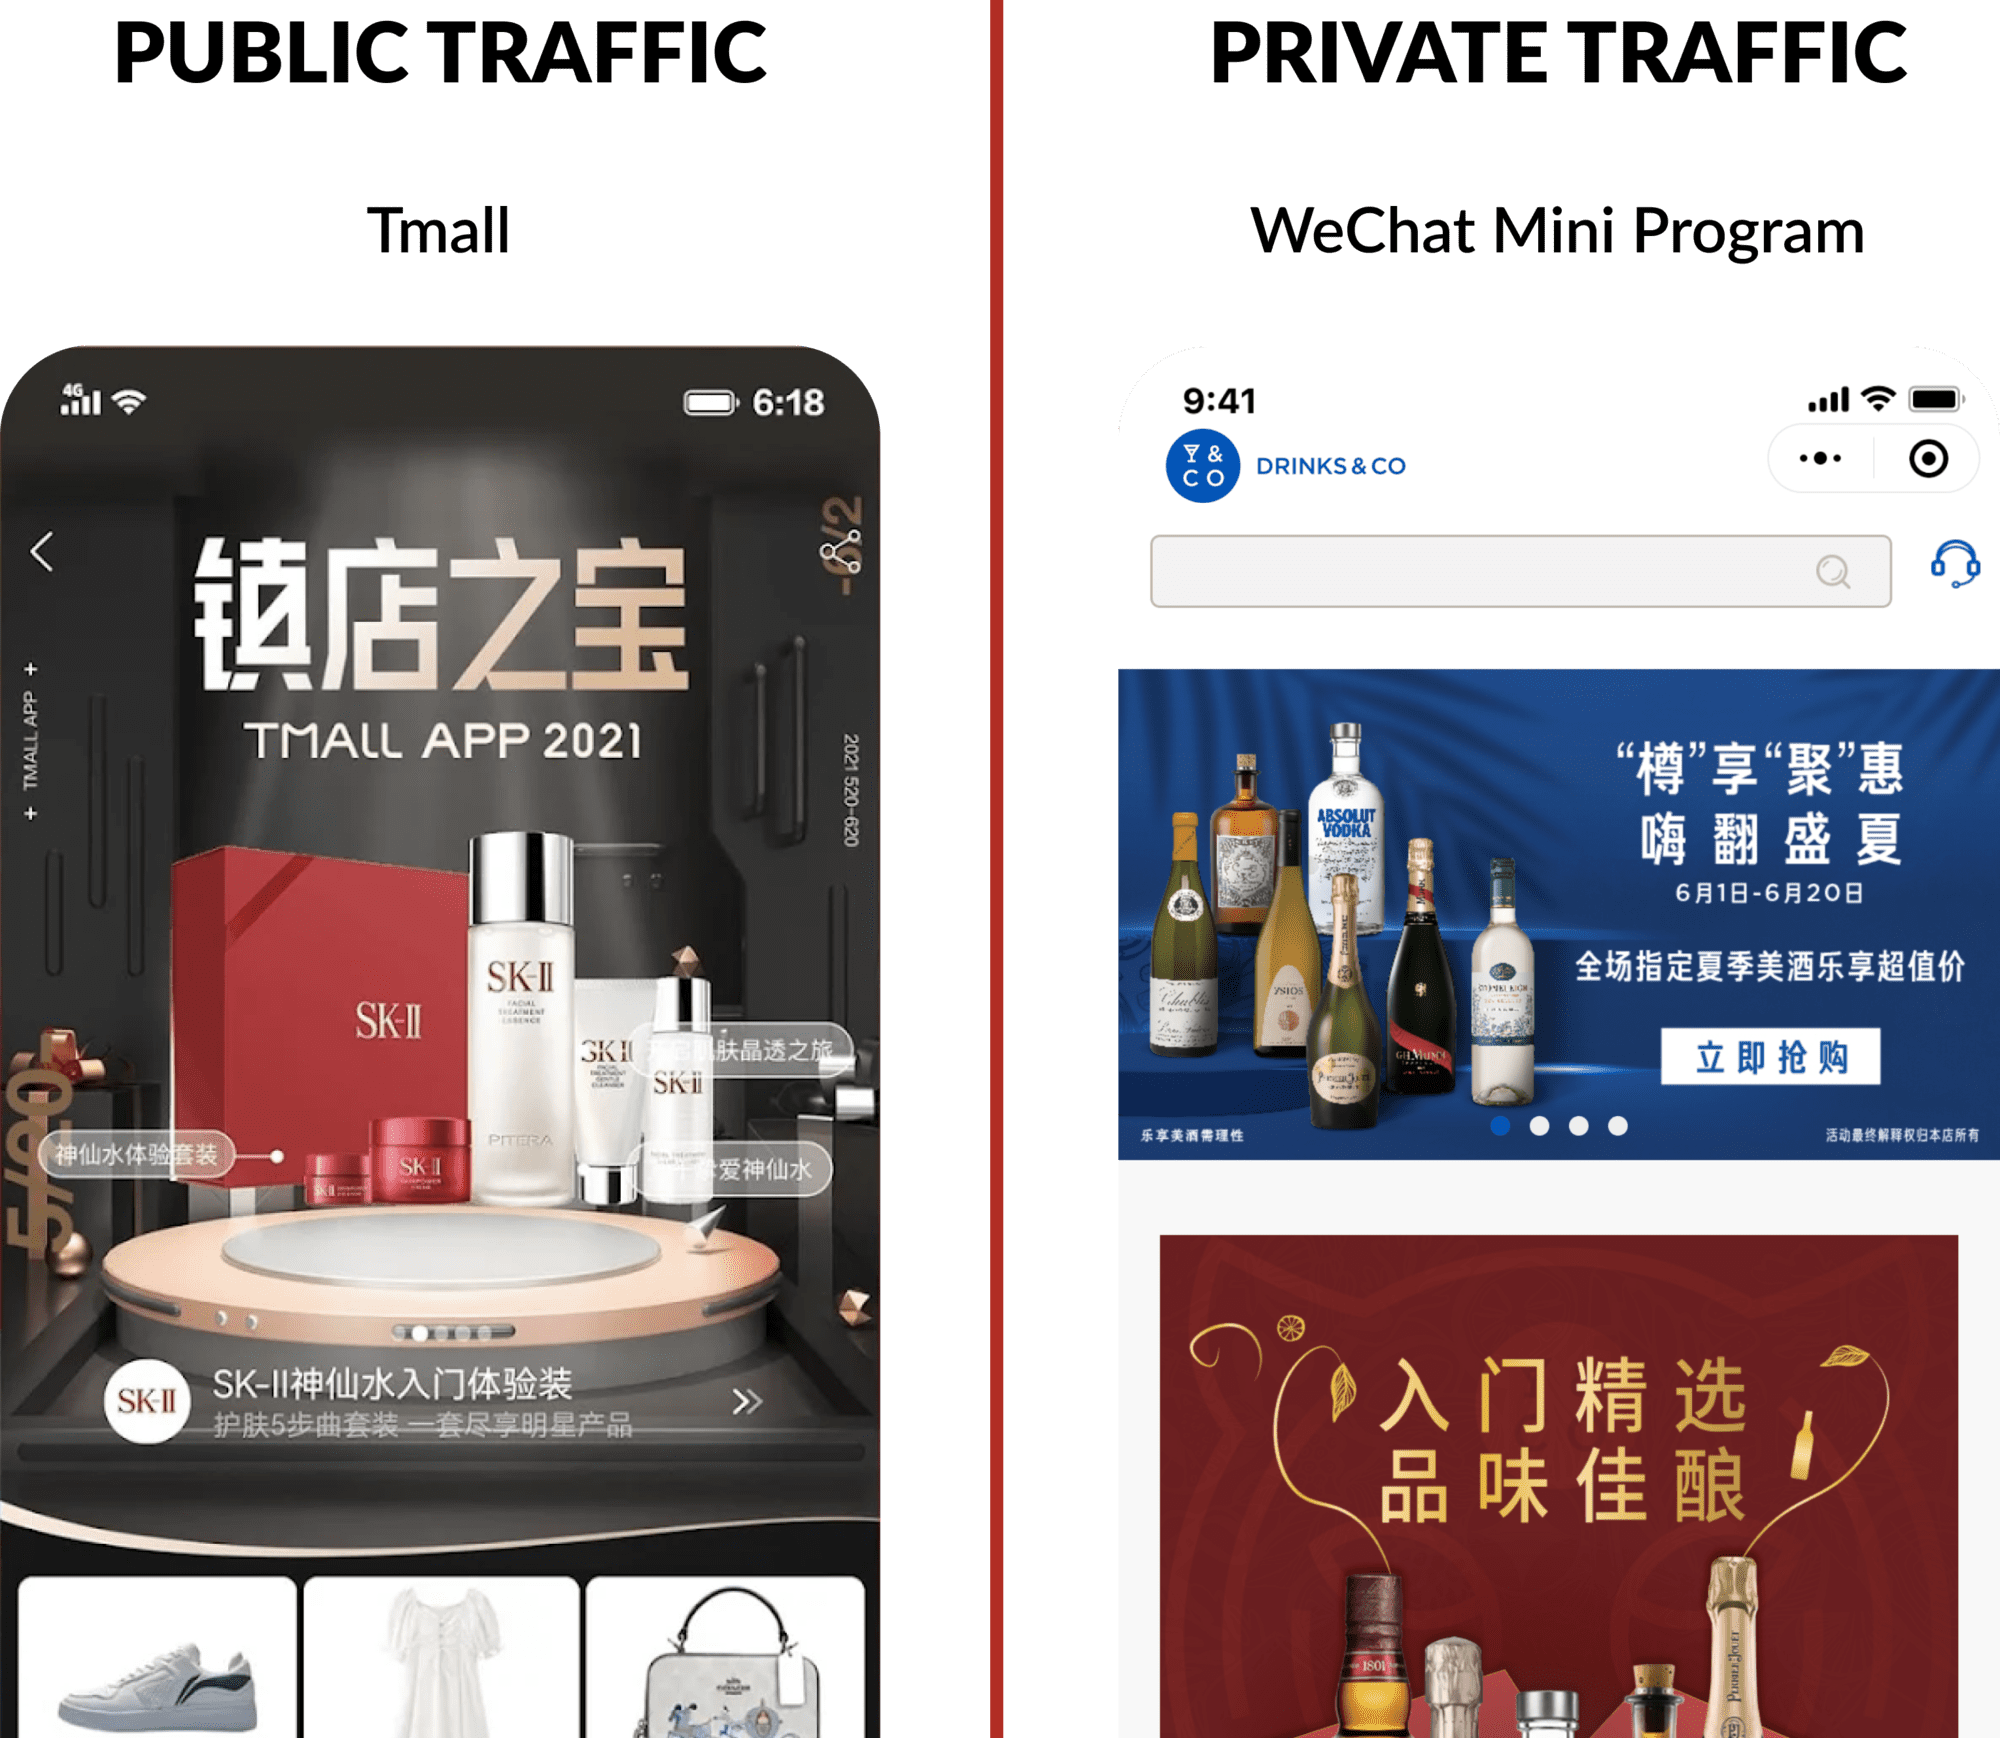 Brands are attempting to diversify by capturing both public traffic from public market places like Tmall and private traffic from private channels like WeChat Mini Program